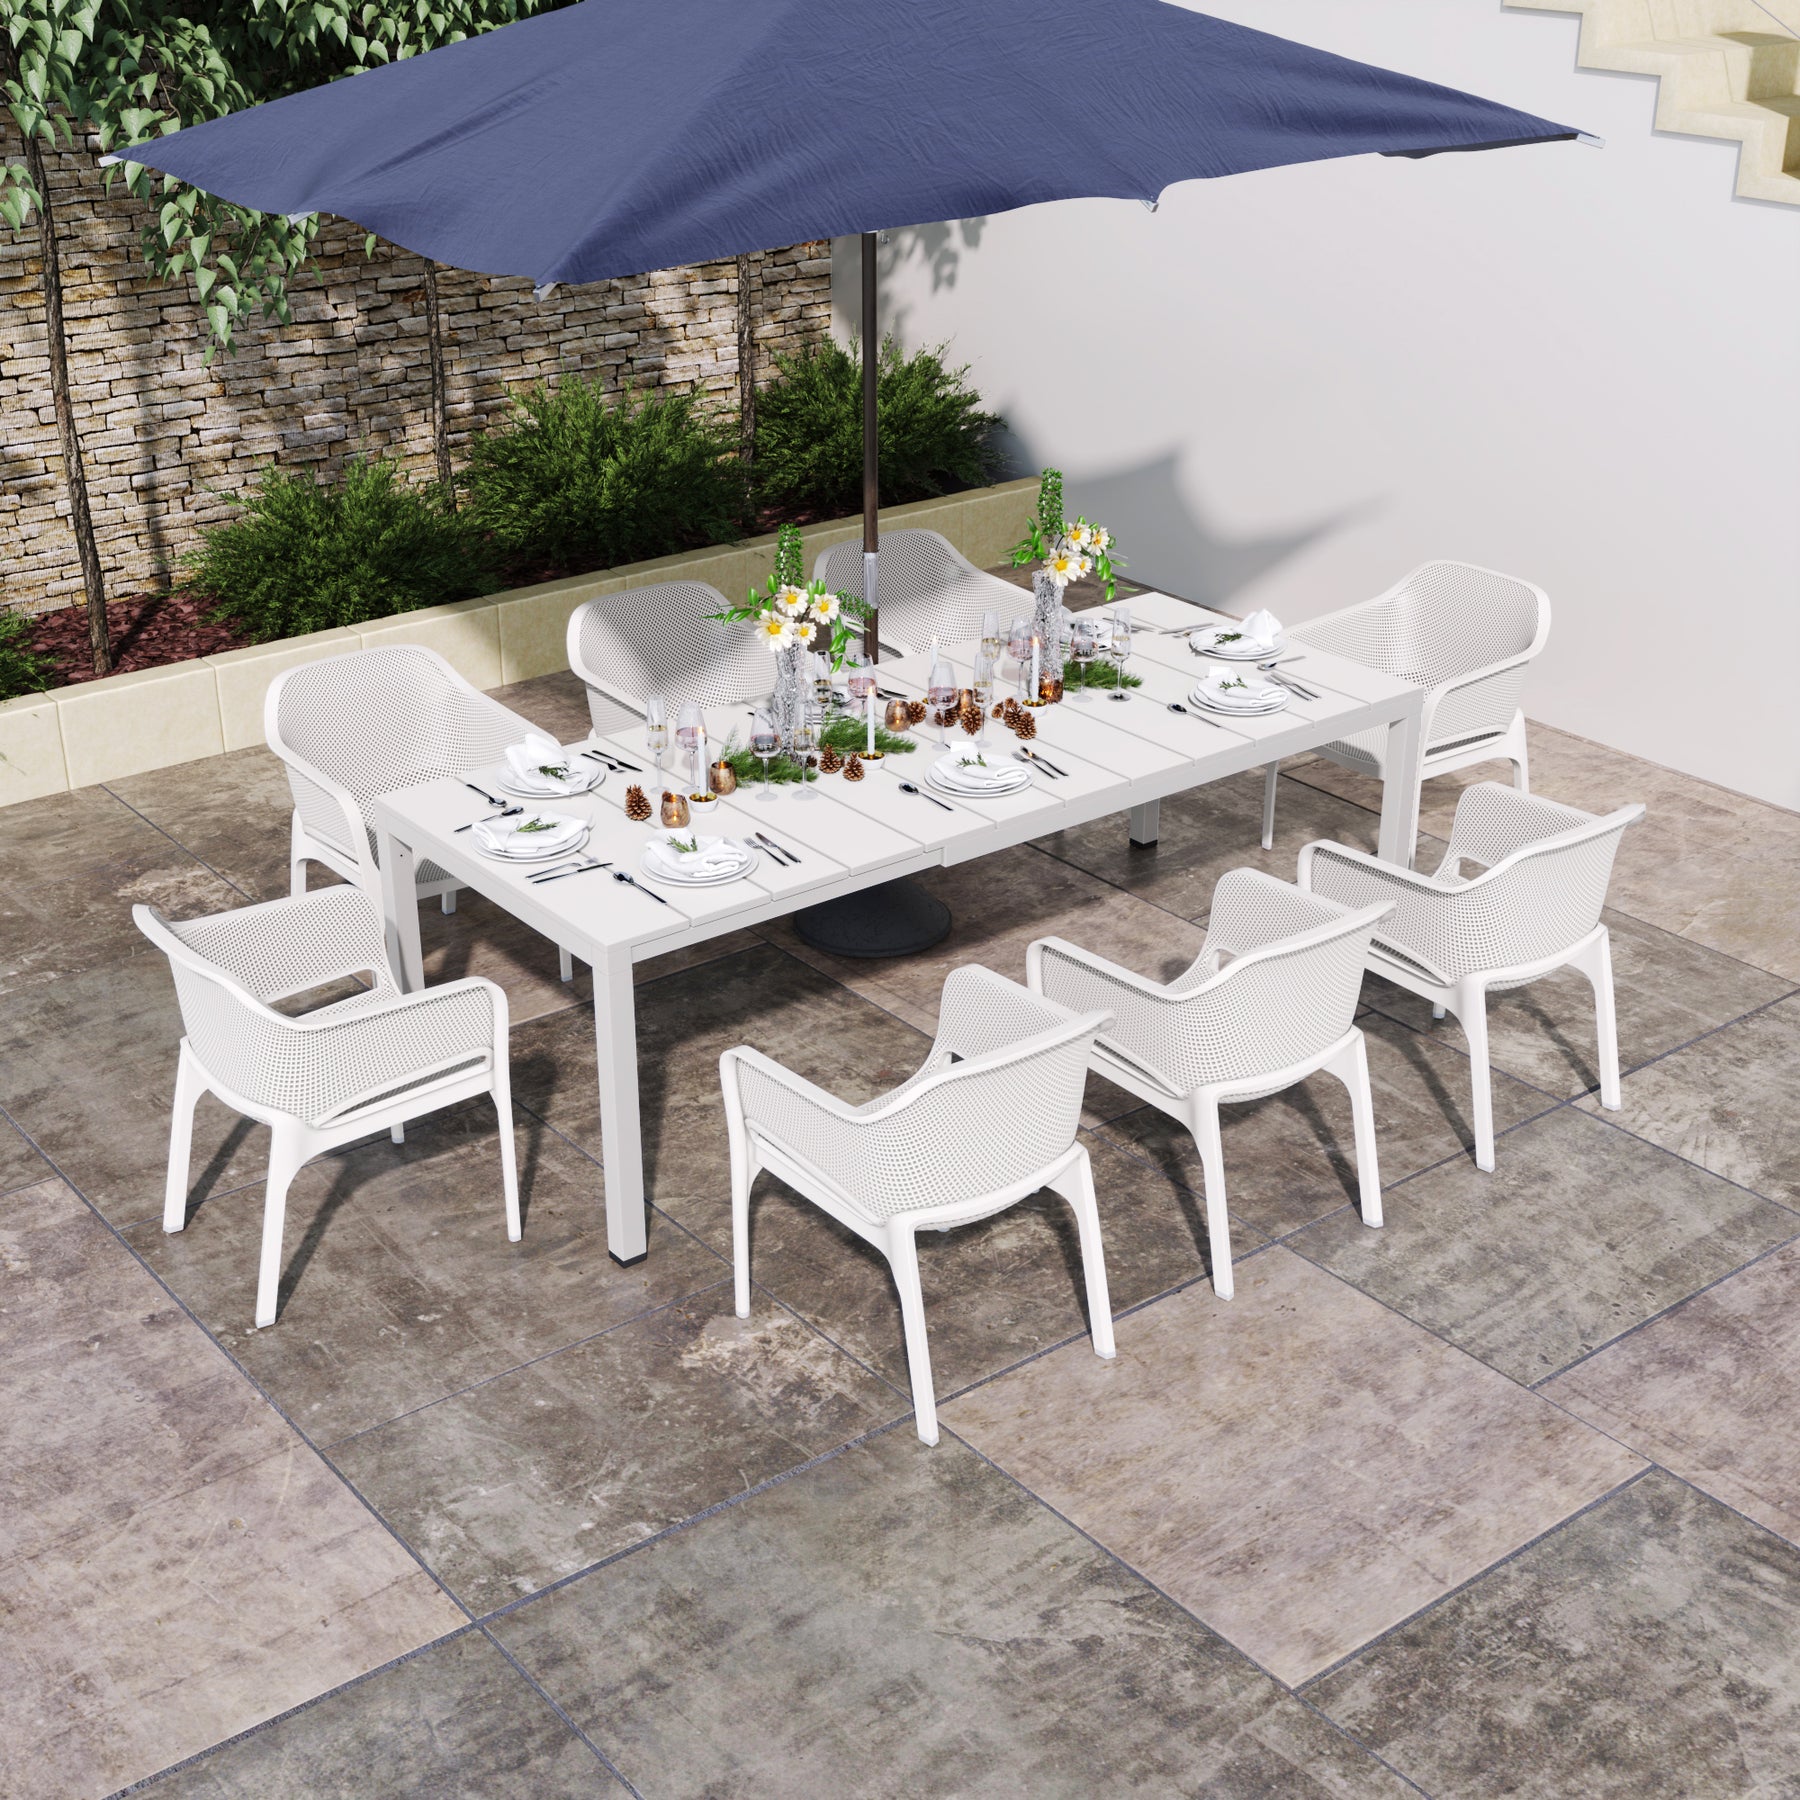 9 Pieces Outdoor Patio Extendable Resin Tables Set With 8 Chairs